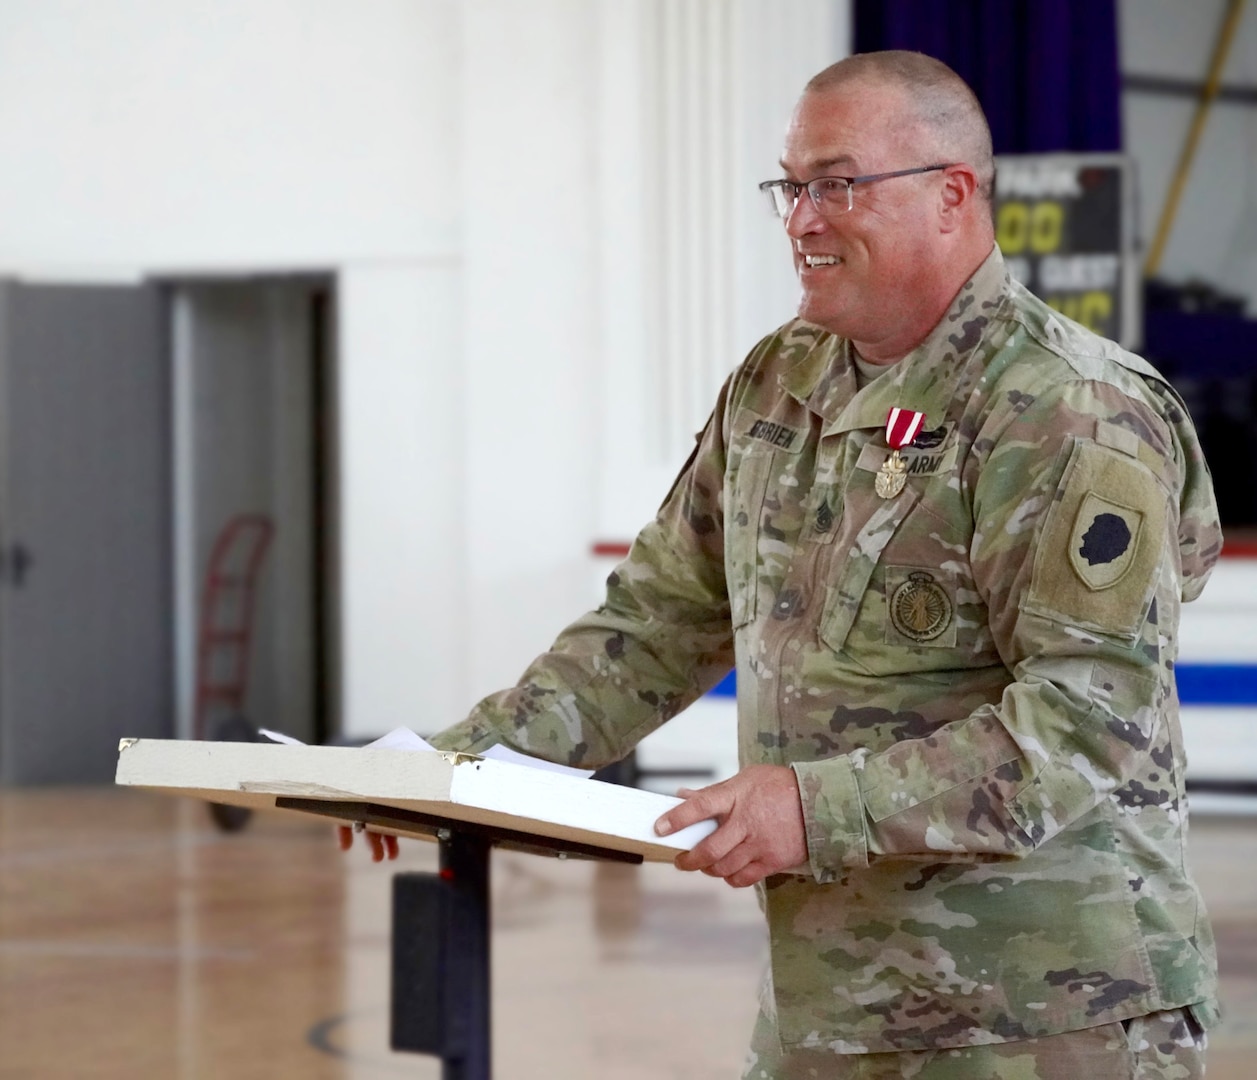 Command Sgt. Maj. Johnny O’Brien thanks friends and family for their support during his 28 years of service in the Illinois Army National Guard (ILARNG) during a retirement ceremony June 9 at the ILARNG armory in Dixon, Illinois.